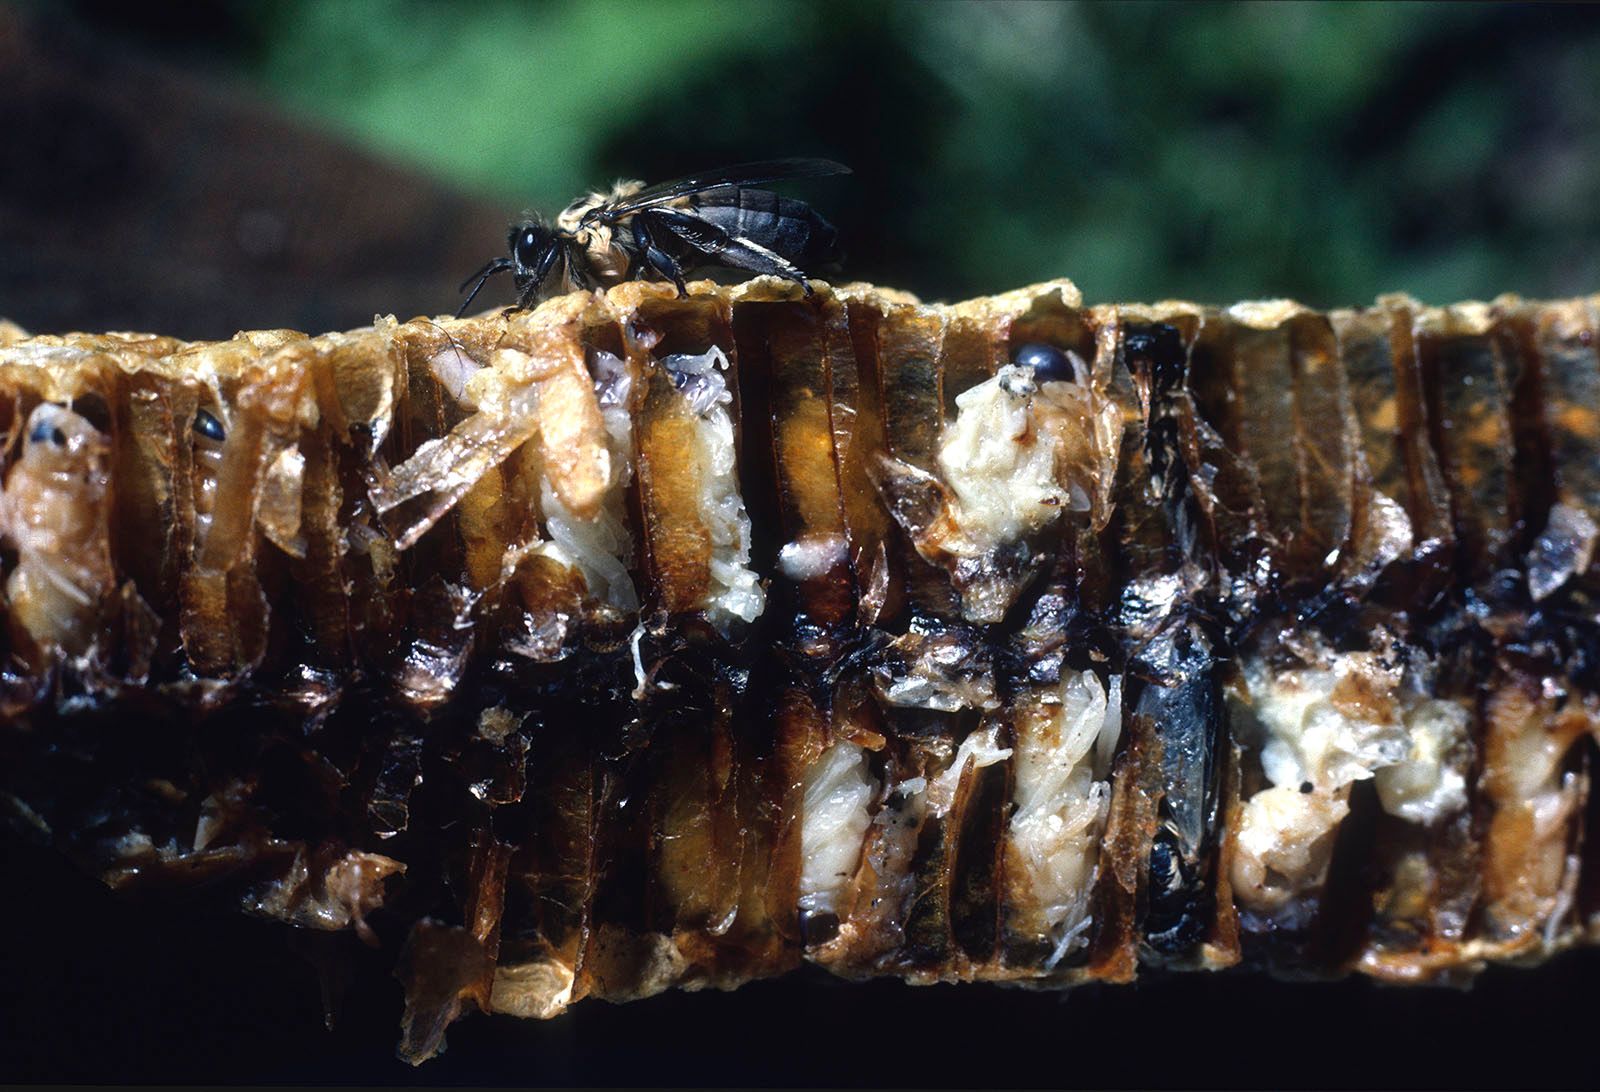 The remains of an Apis laboriosa nest, destroyed during a honey hunt in Nepal. 